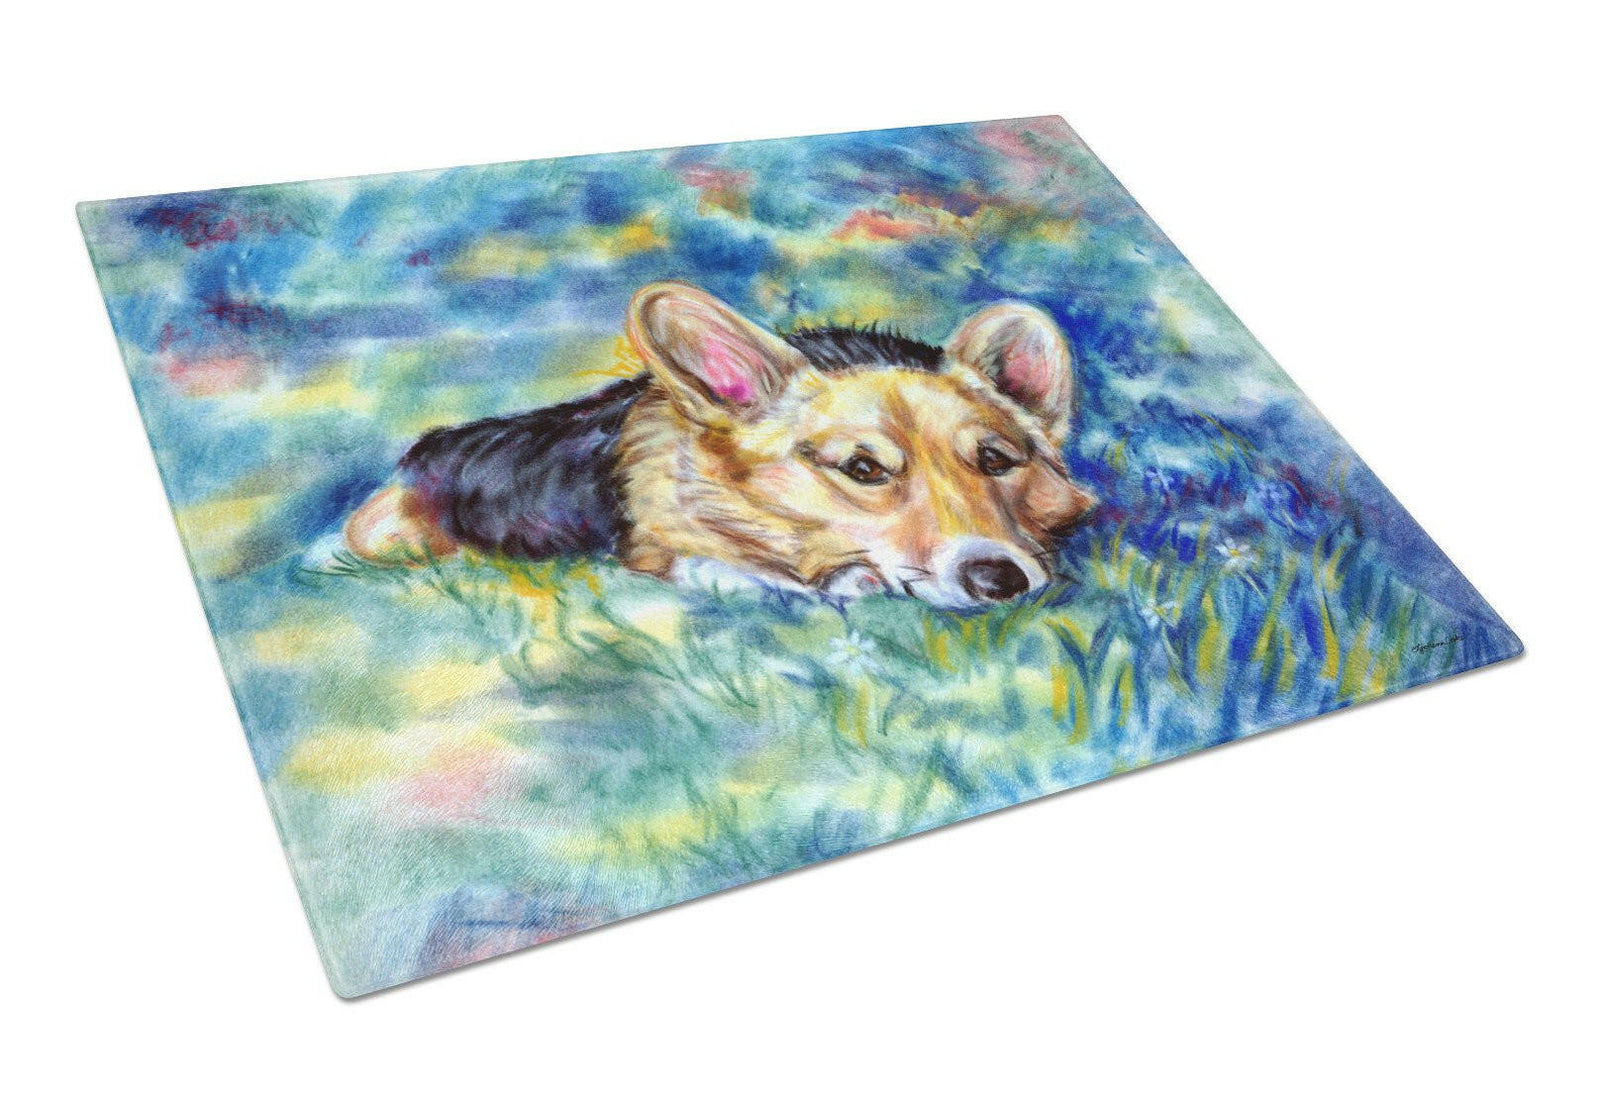 Corgi Tuckered Out Glass Cutting Board Large 7409LCB by Caroline's Treasures